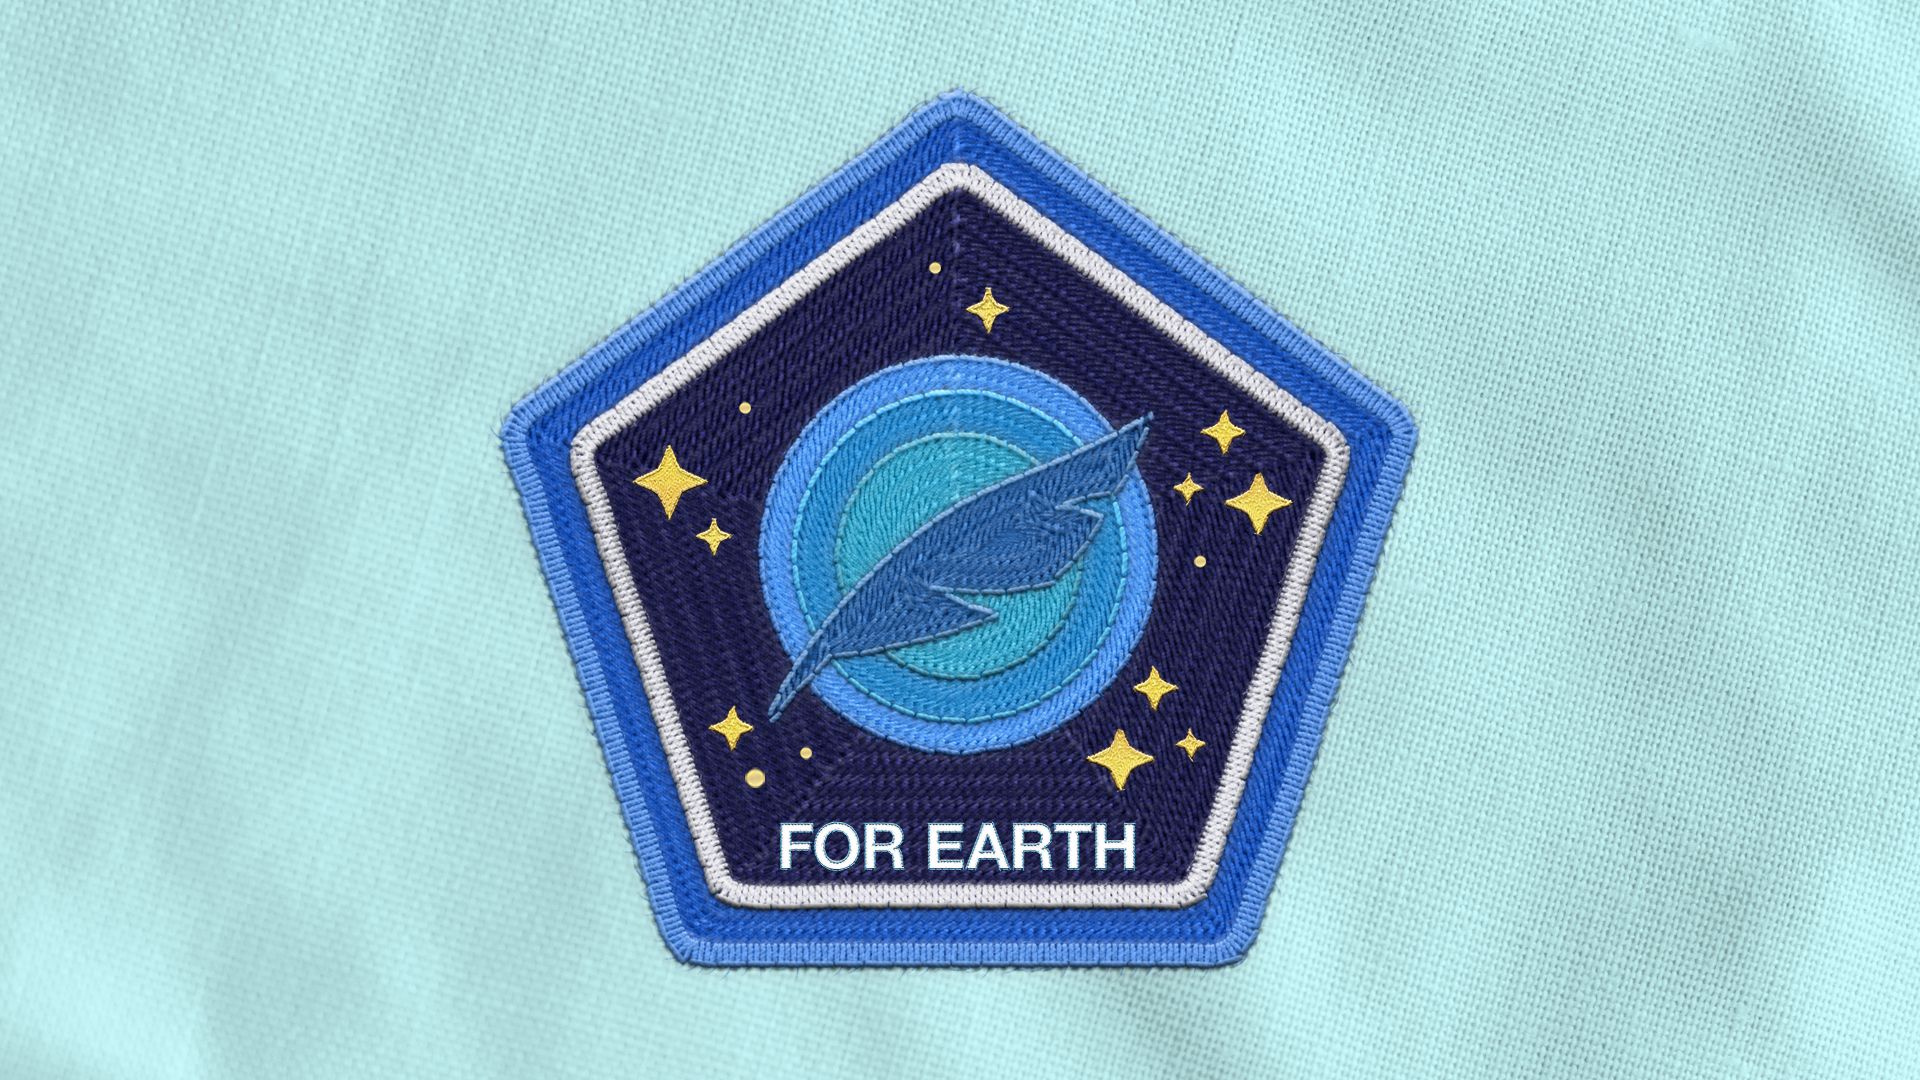 Illustration of an astronaut badge depicting a feather in front of the Earth as a blue planet, the words "FOR EARTH" are on the badge.